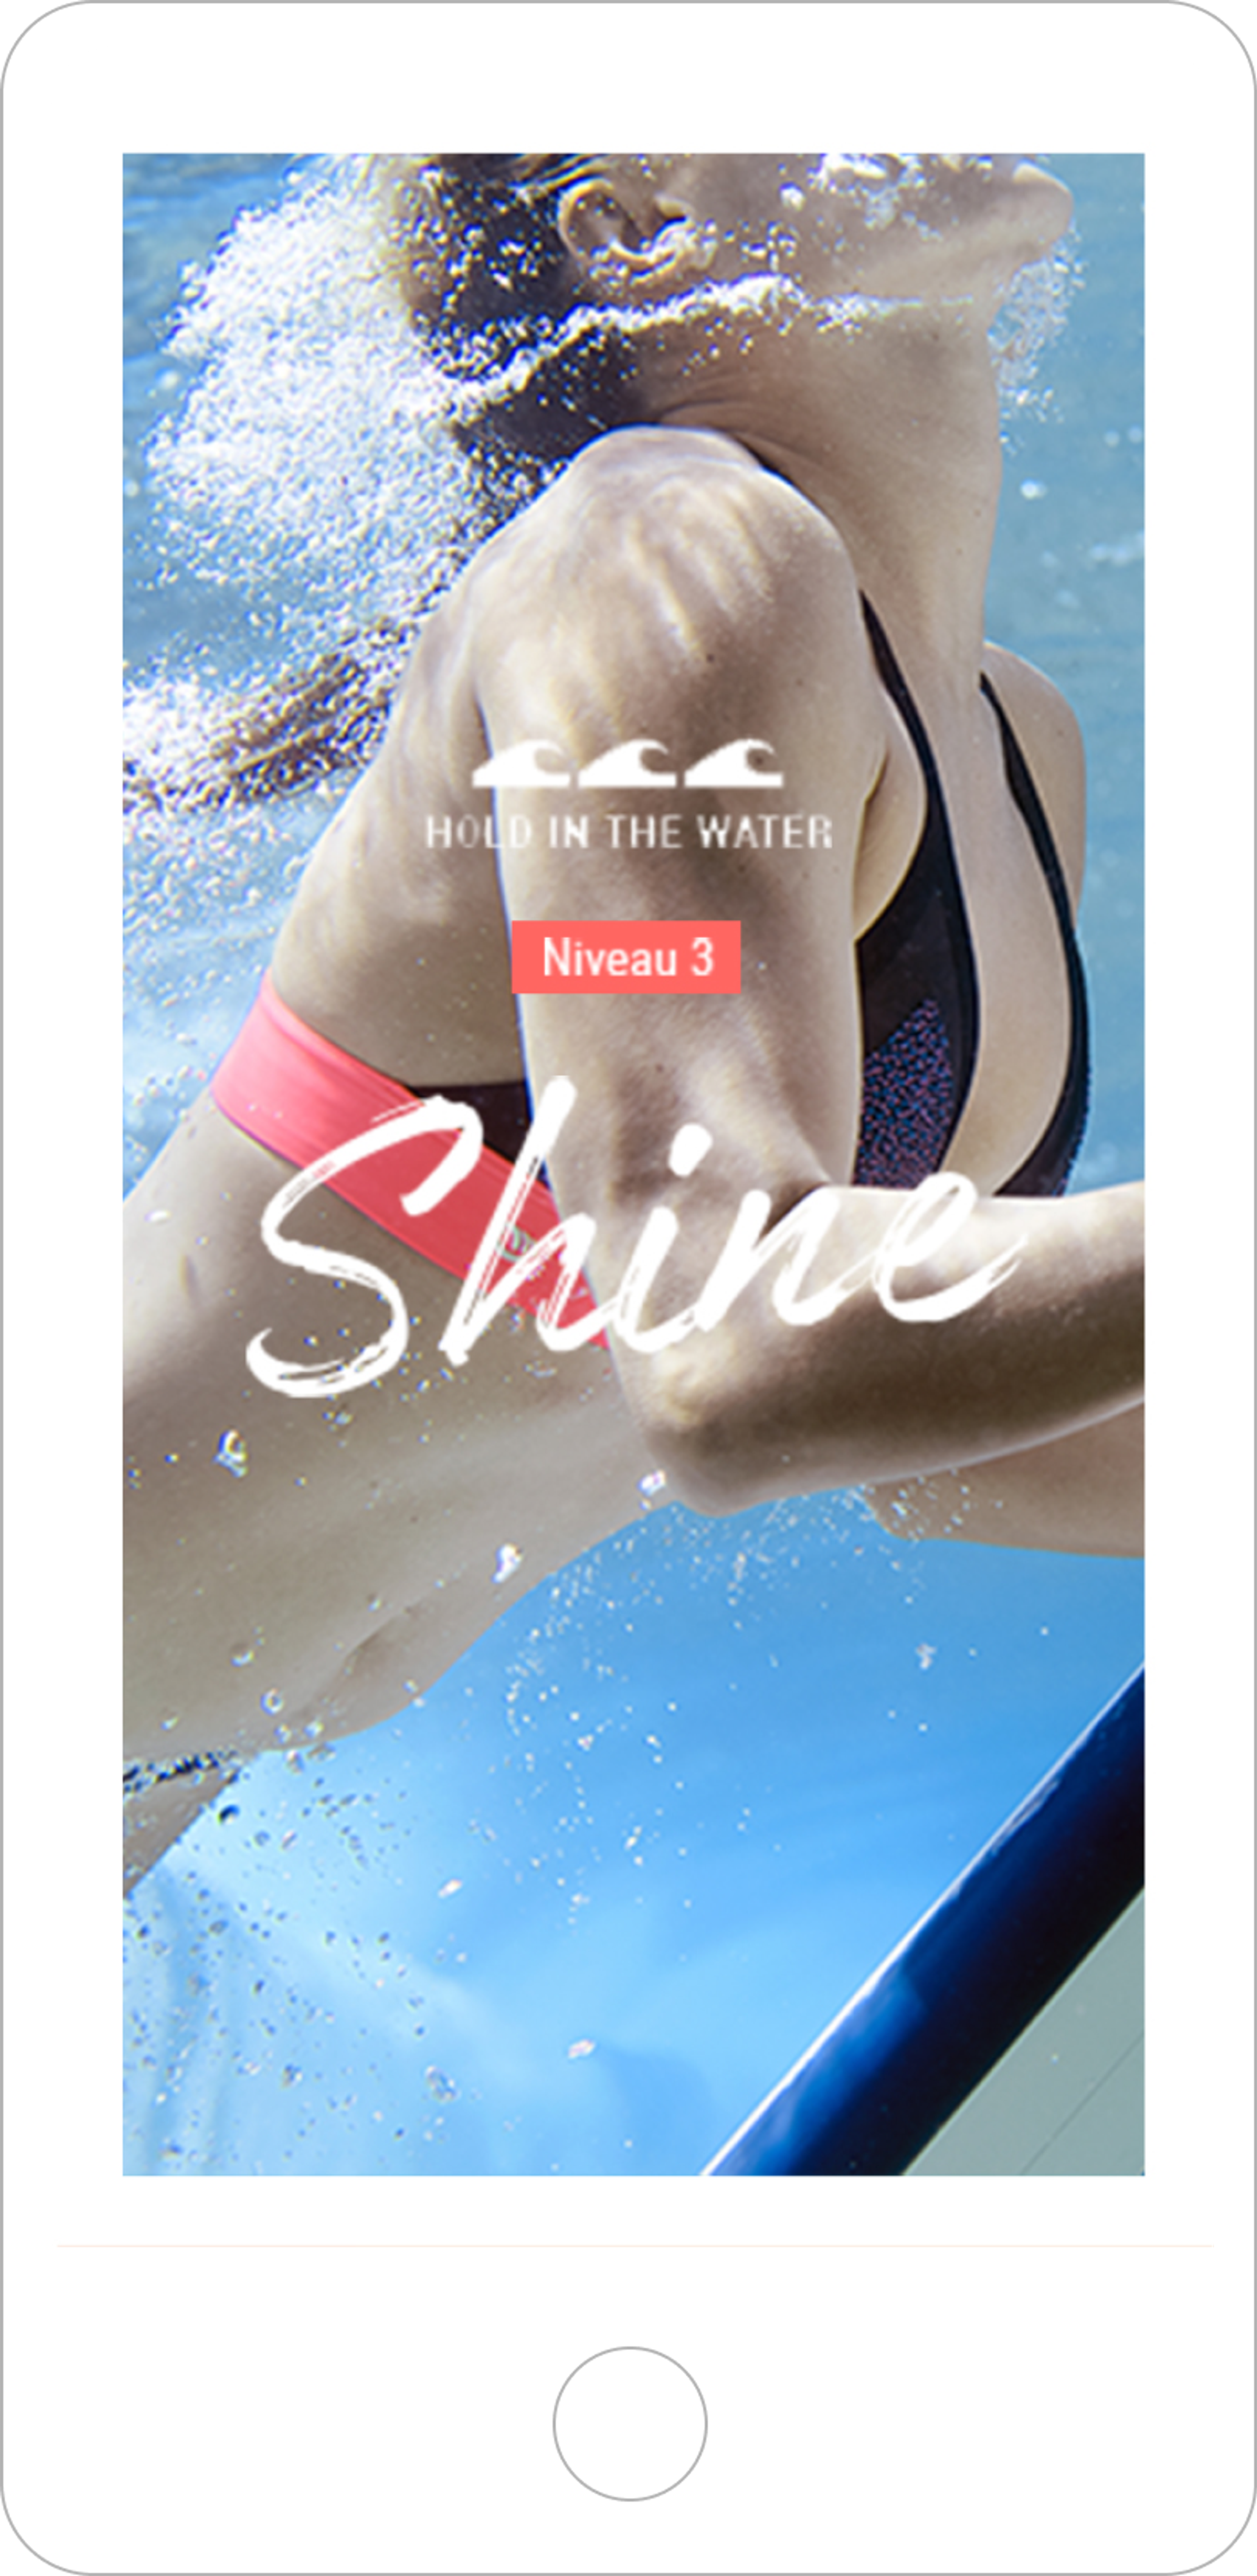 OLAIAN Lookbook 2018 summer edition landing page mobile shine